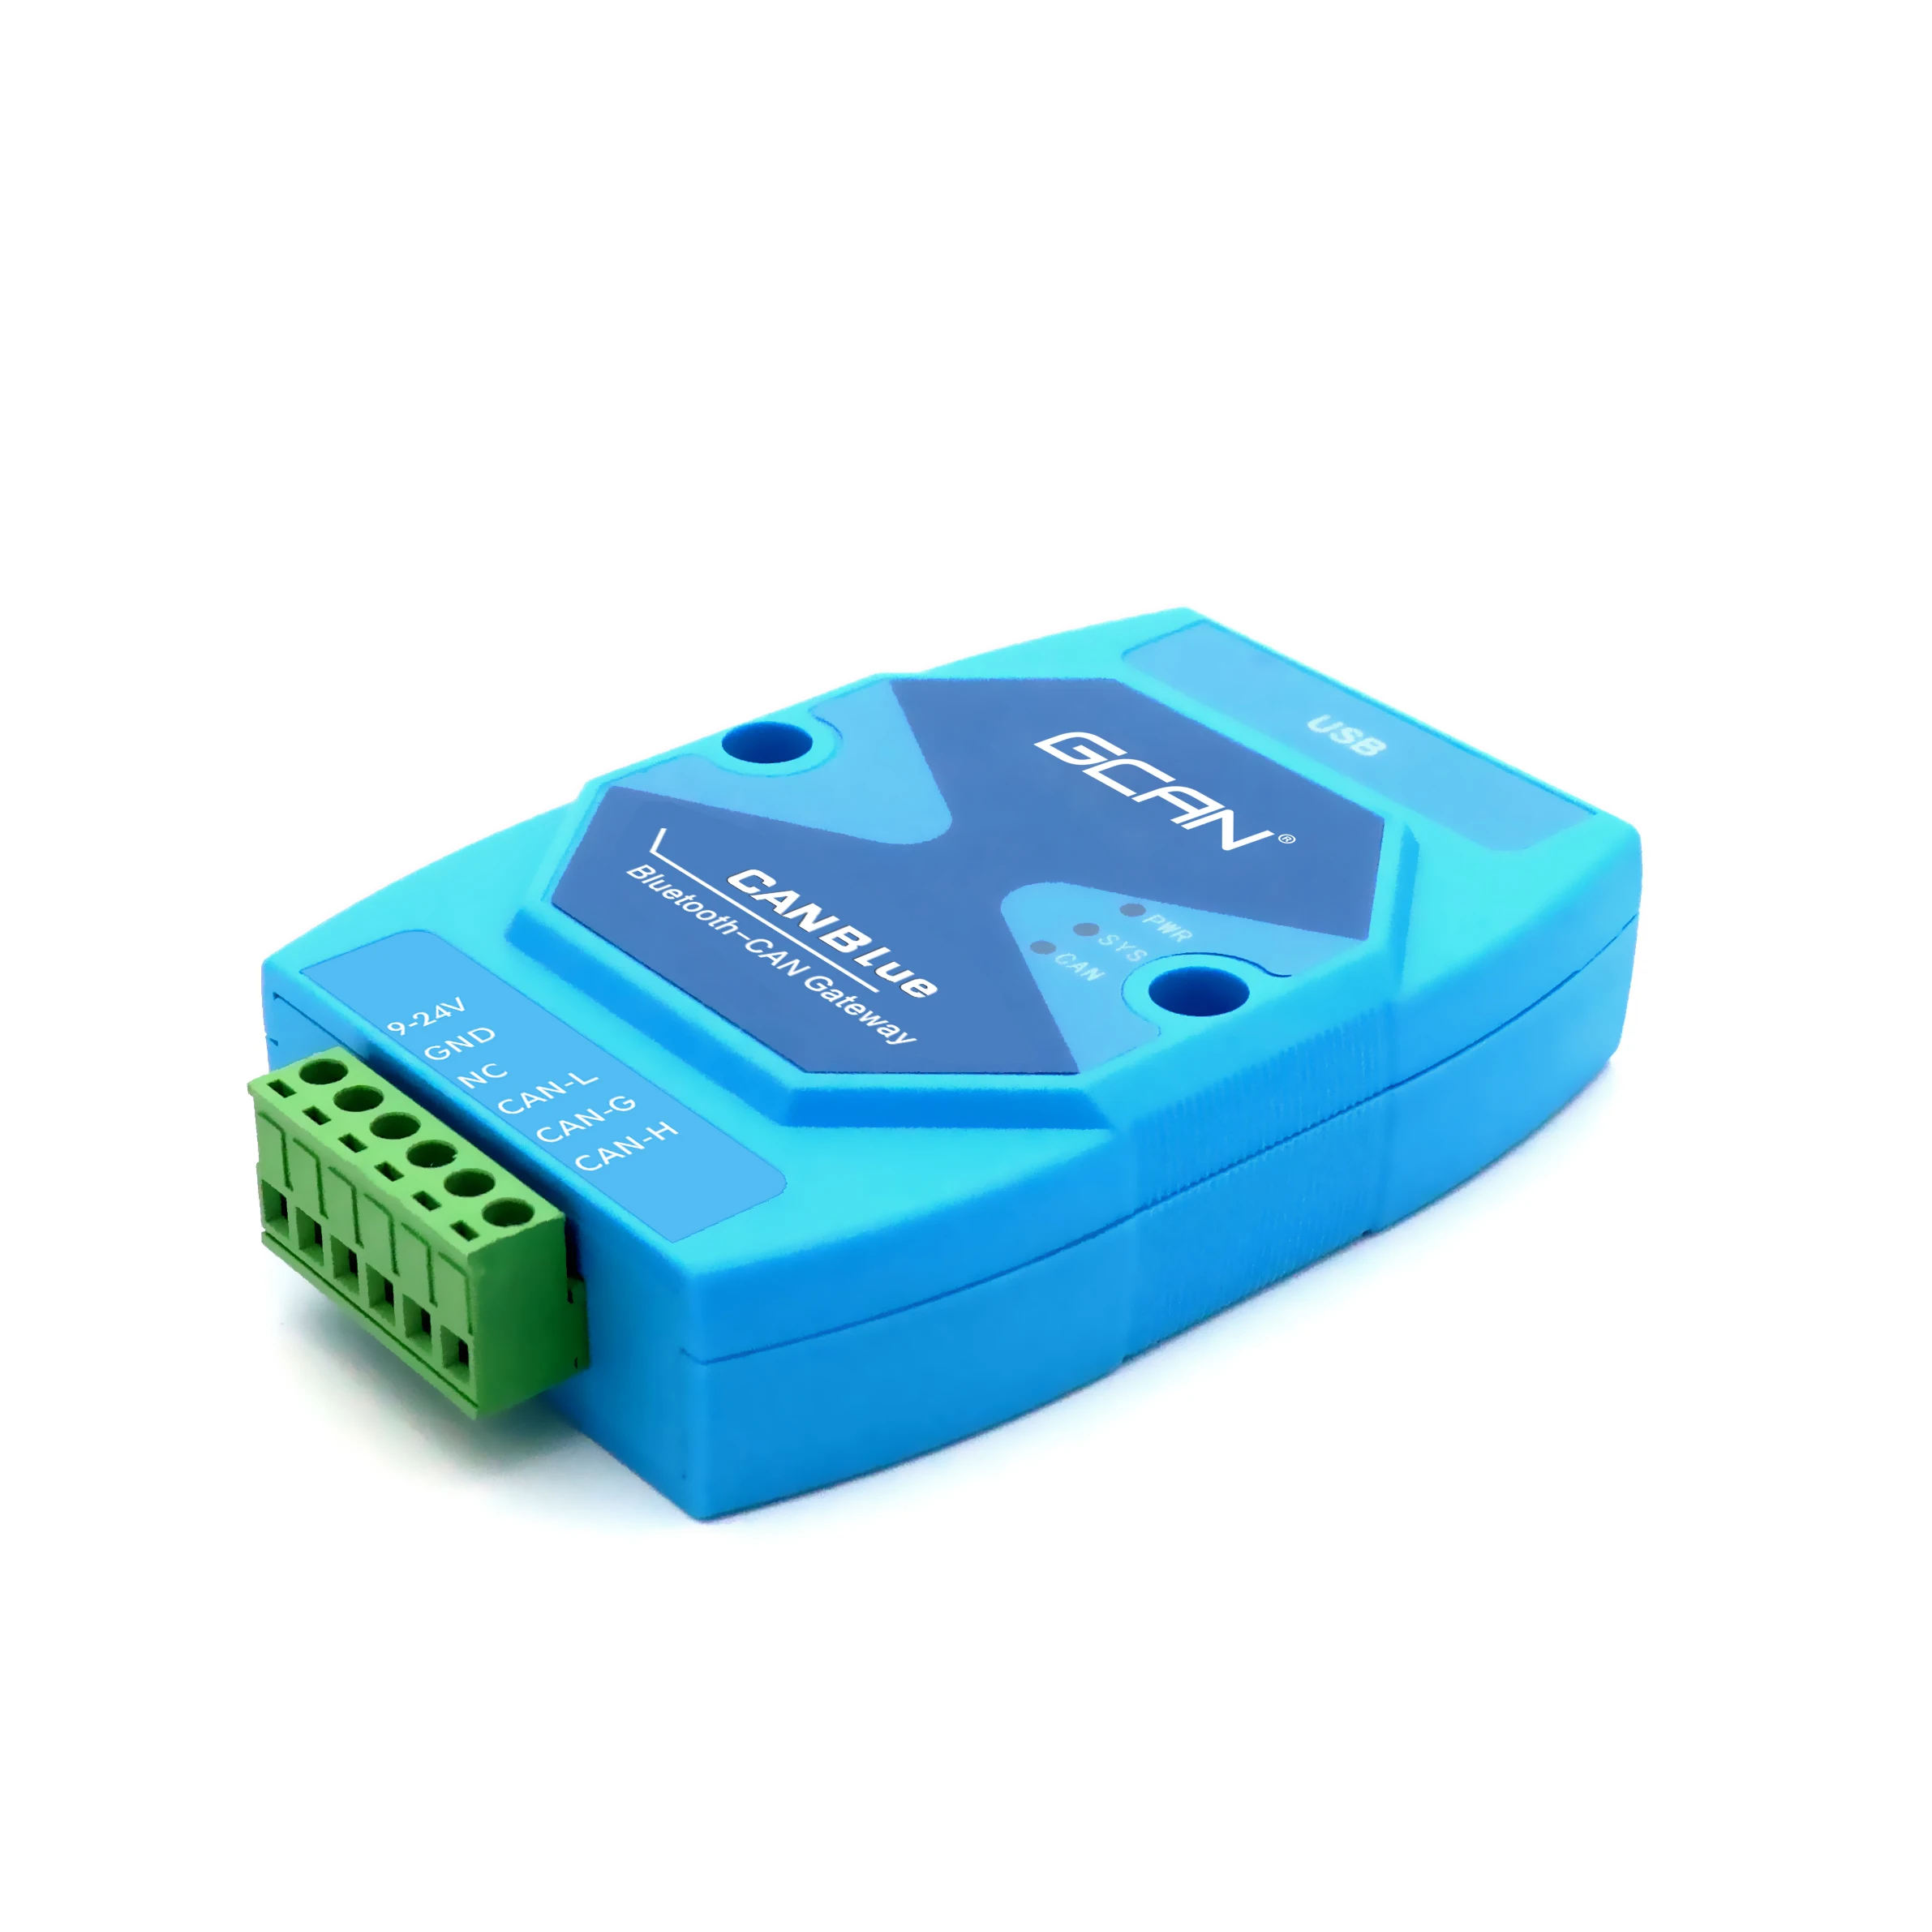 High Quality GCAN-203 Industrial grade Bluetooth to CAN-Bus converter gateway support android examples